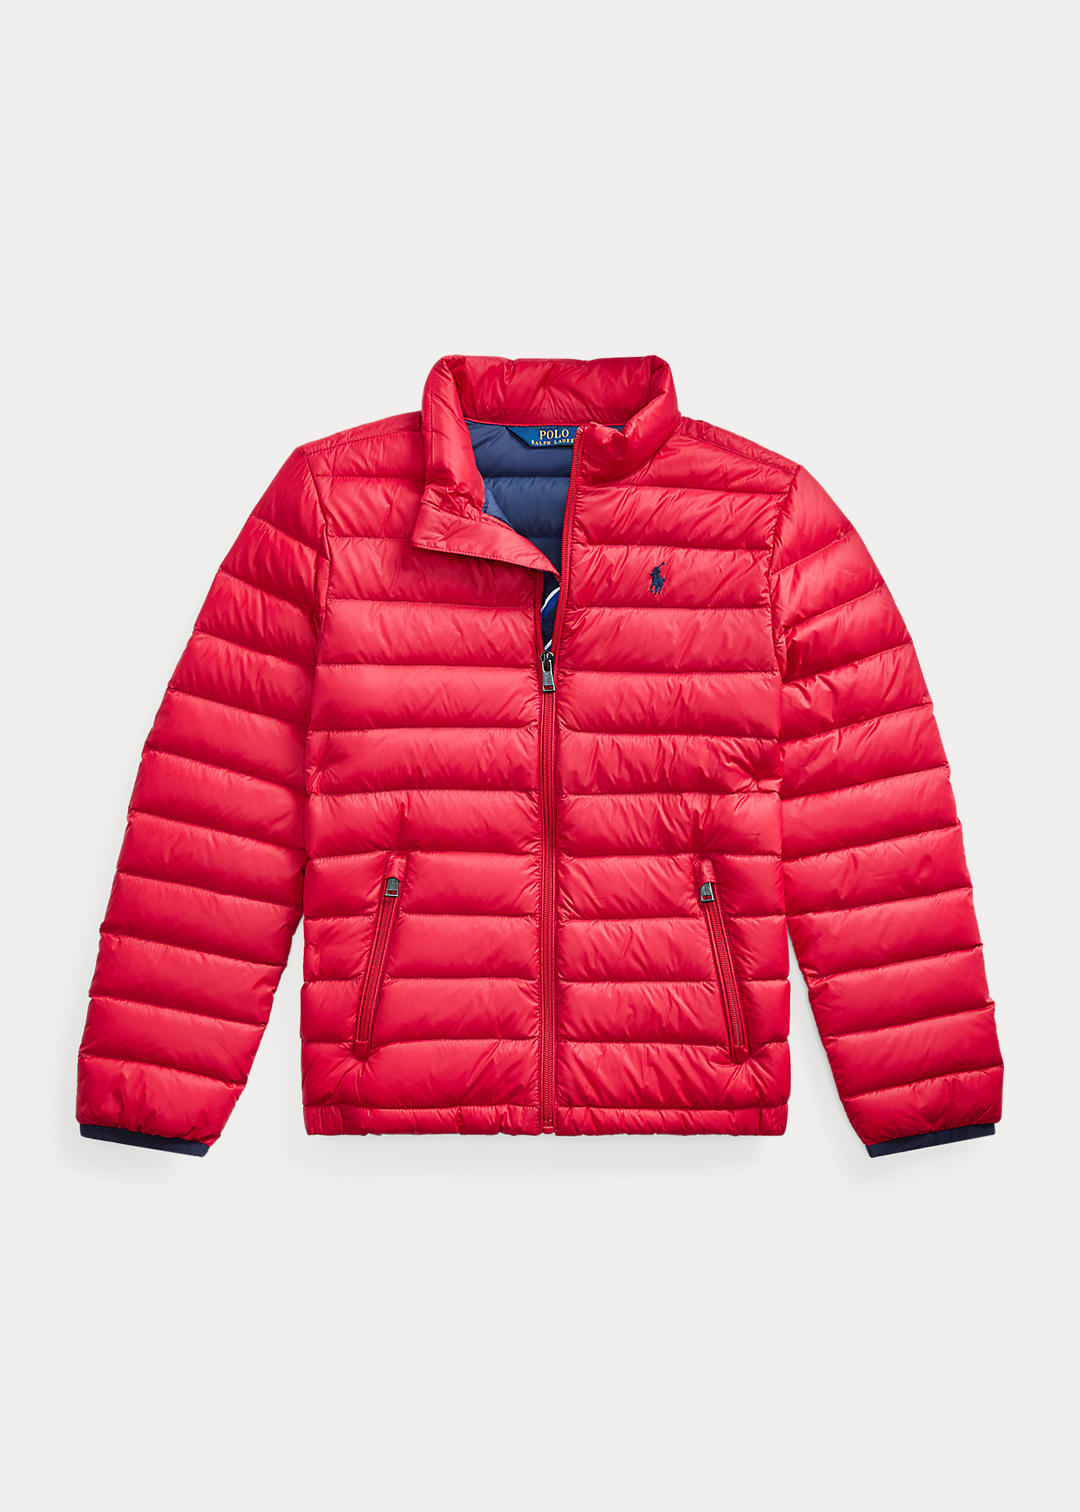 BOYS 6-14 YEARS Packable Quilted Down Jacket 1